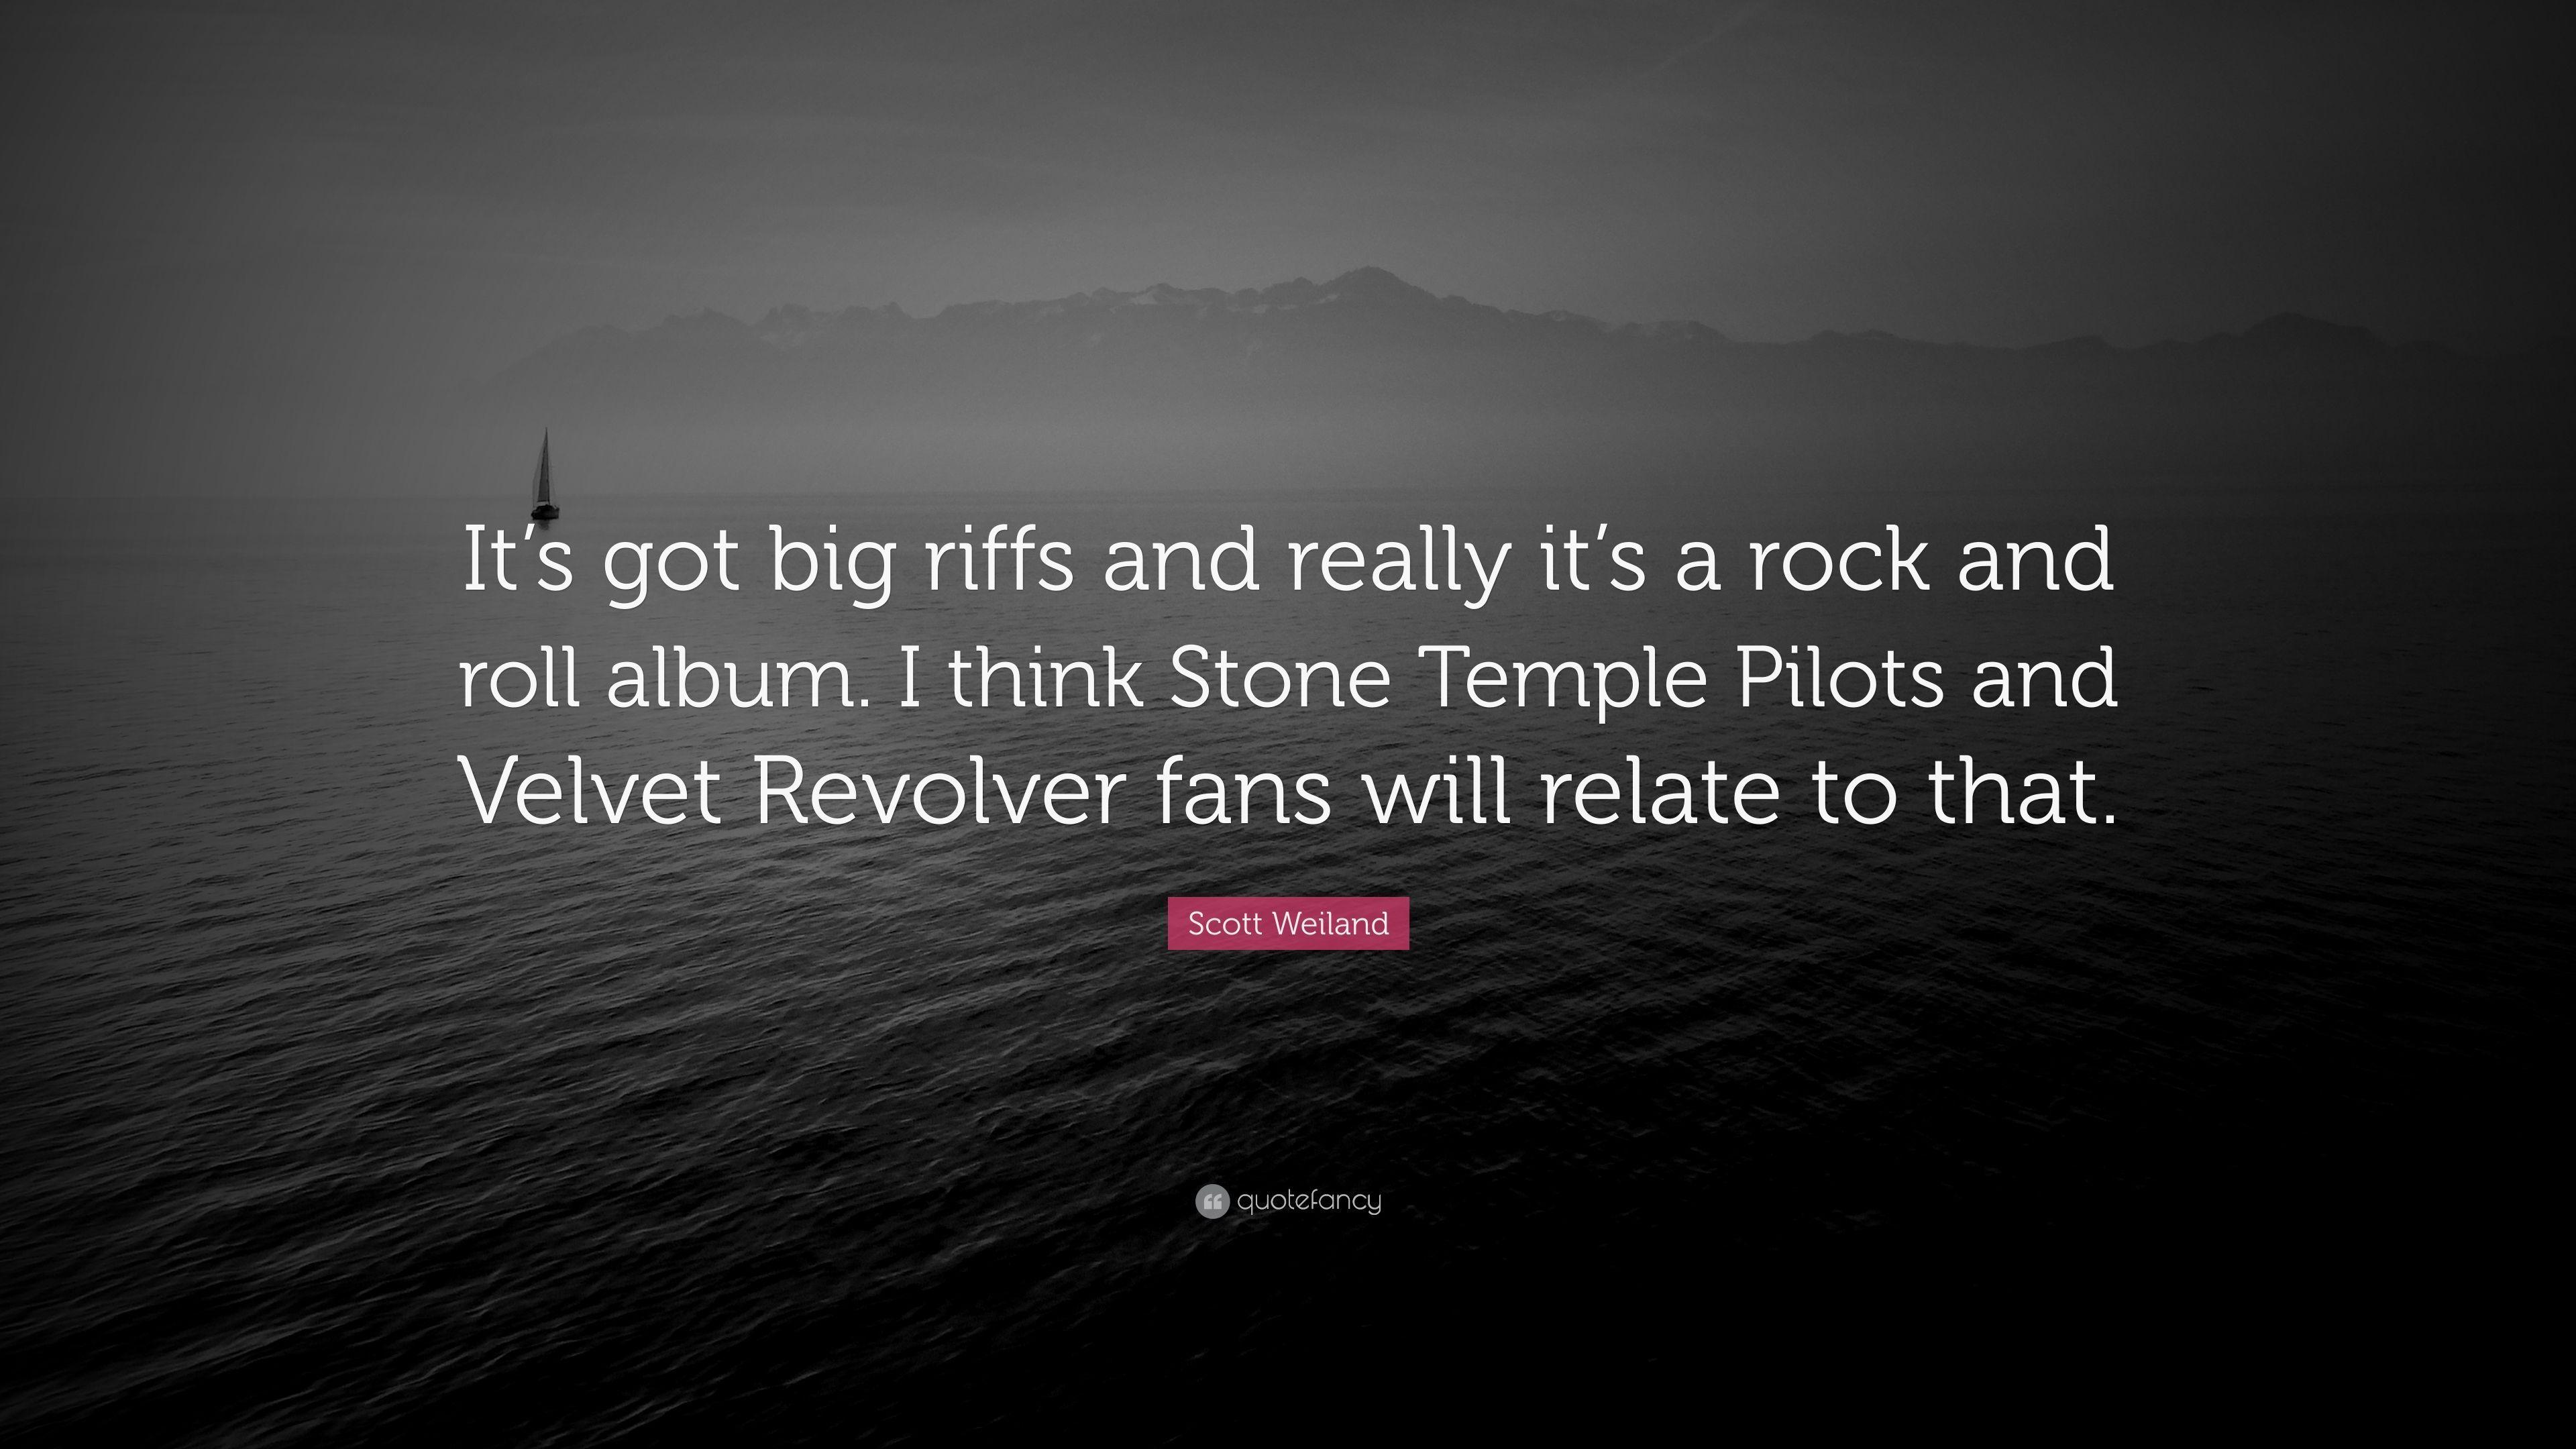 Scott Weiland Quote: “It's got big riffs and really it's a rock